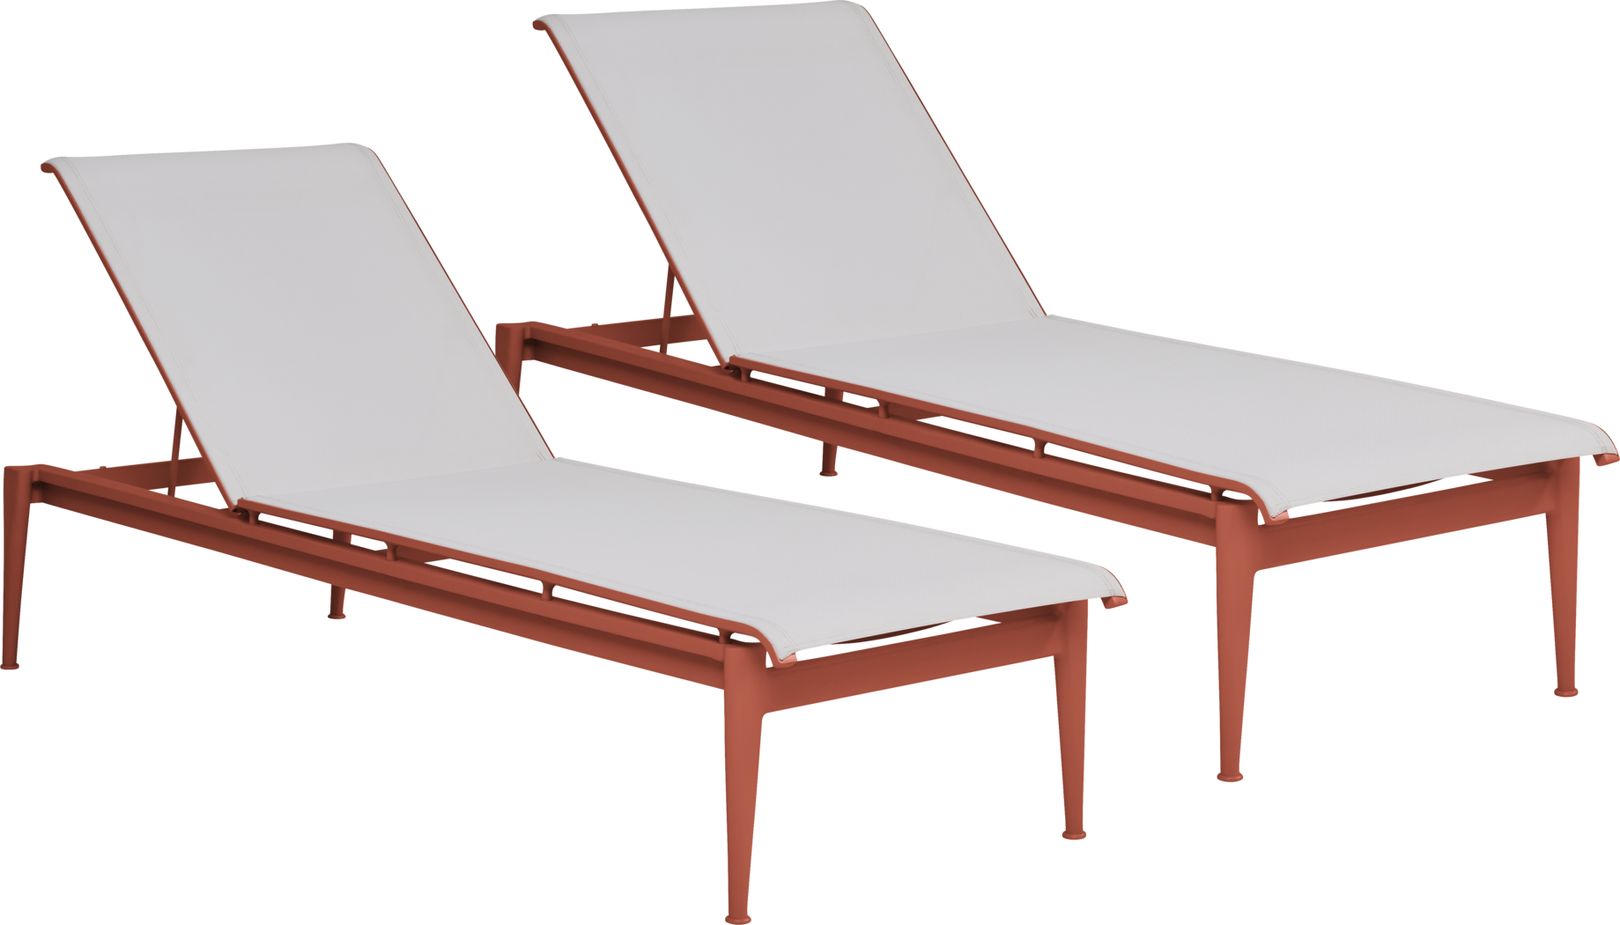 photo of a pair of teak chaise lounges with ivory seats and a white side table